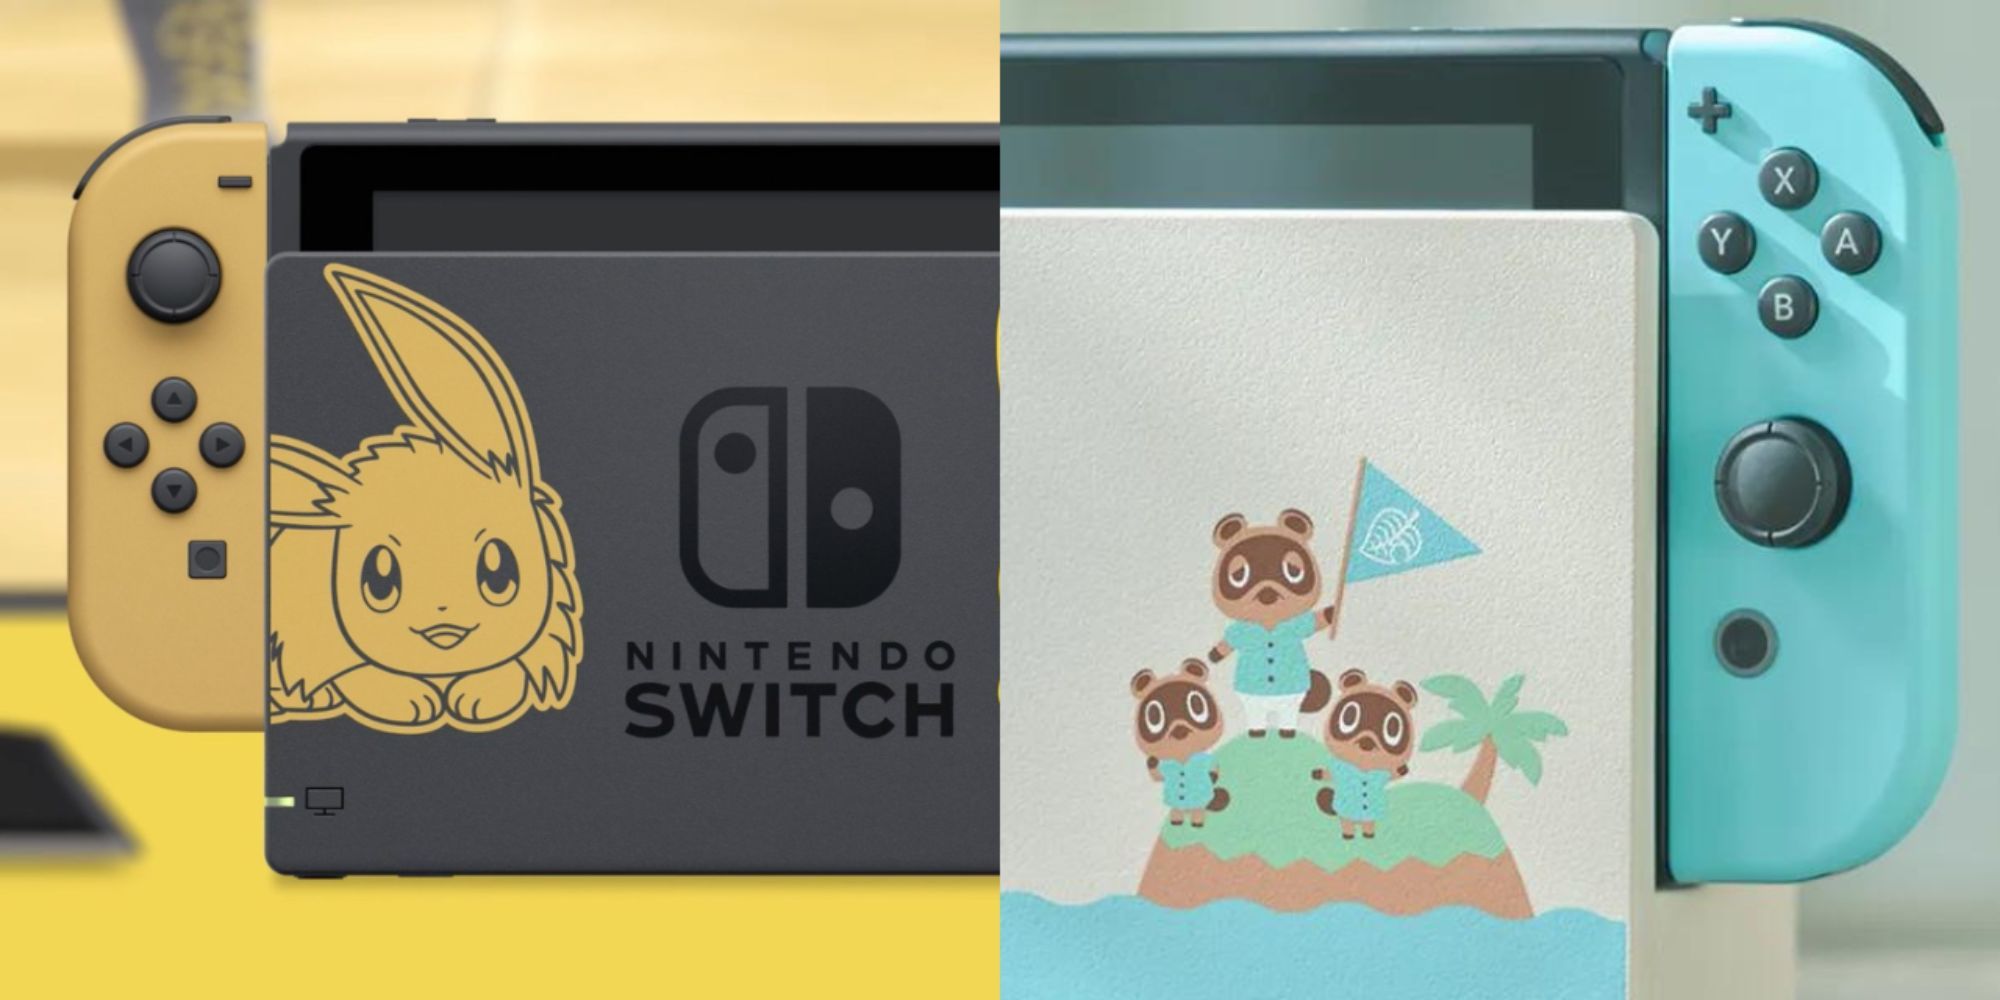 Split image Pokemon Let's Go Nintendo Switch with Eevee and Animal Crossing New Horizons Nintendo Switch with Tom Nook, Timmy, and Tommy